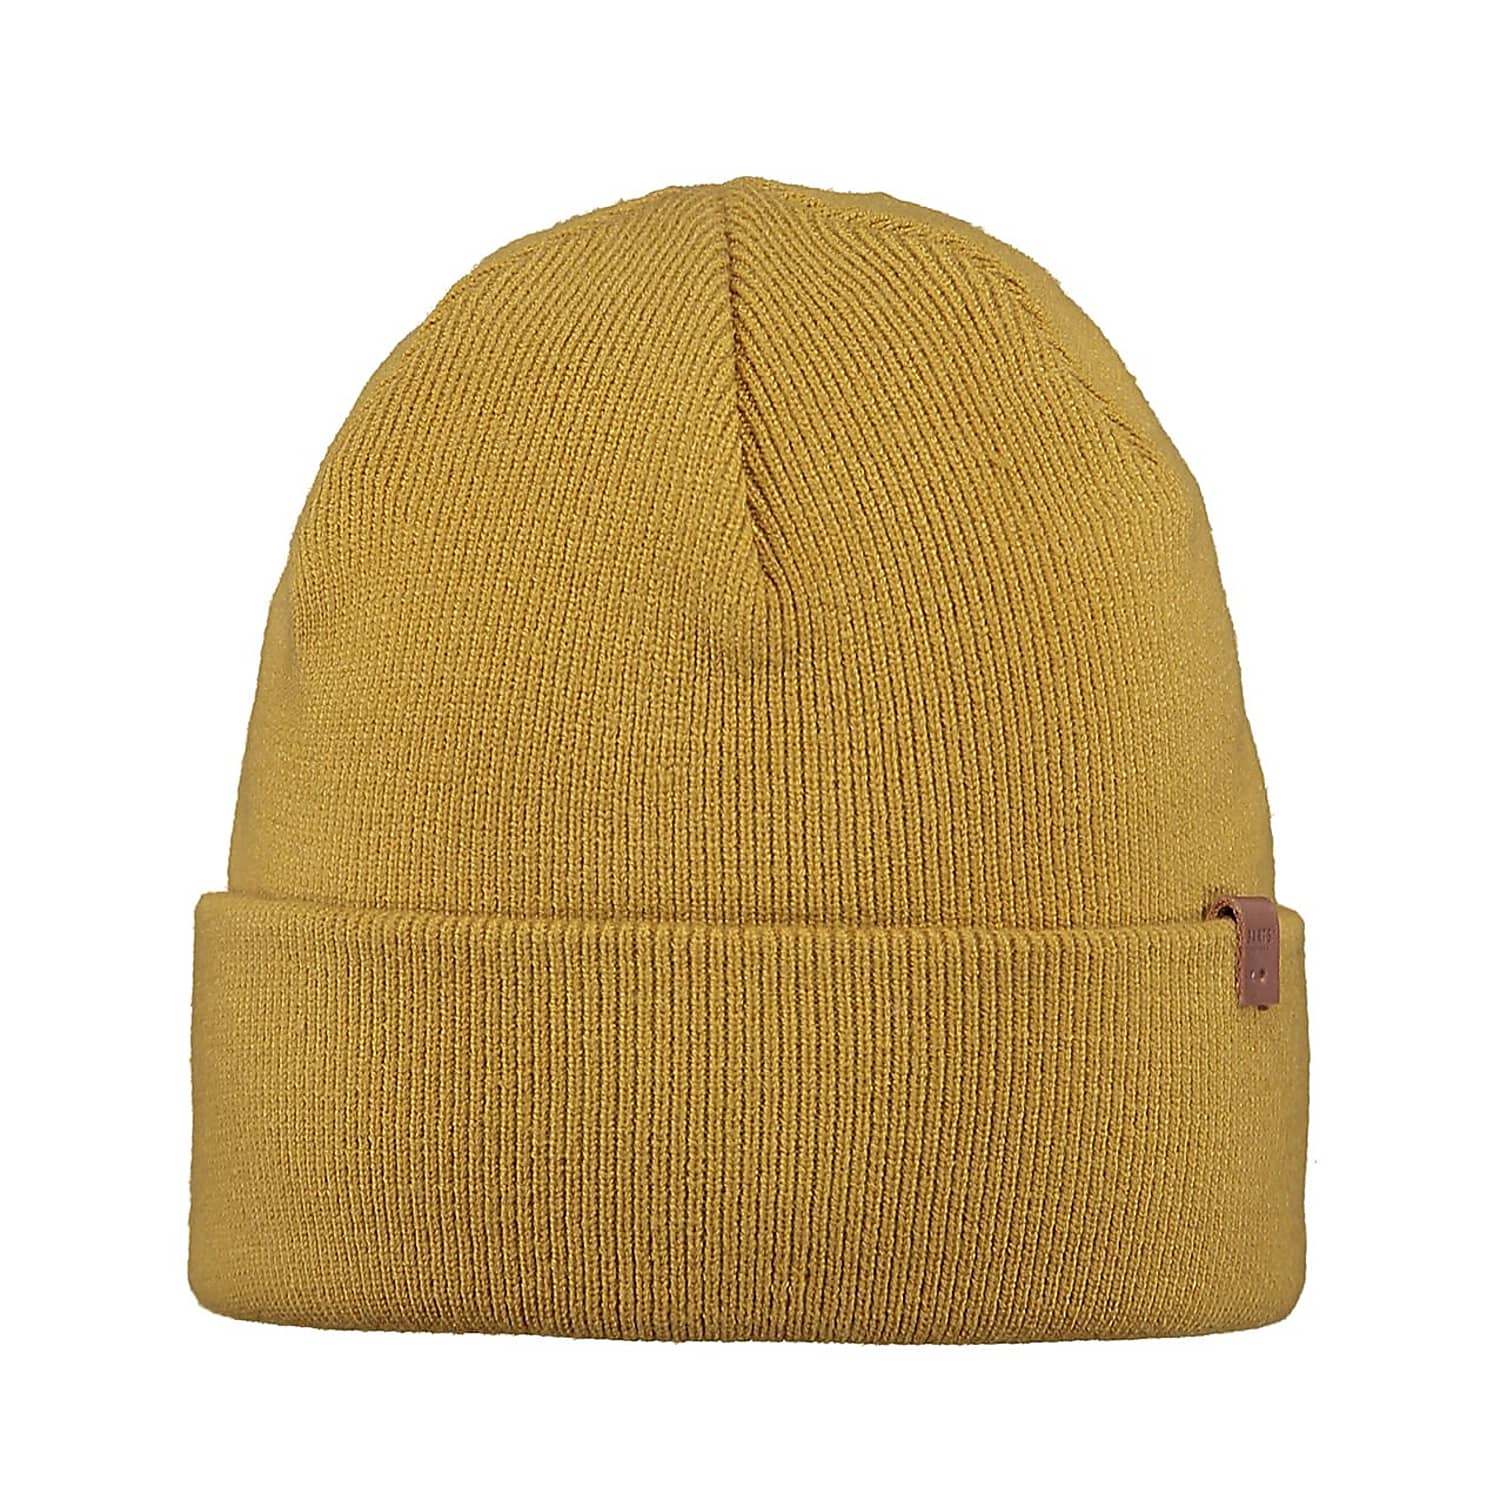 Barts M - and BEANIE, WILLES cheap shipping Fast Yellow